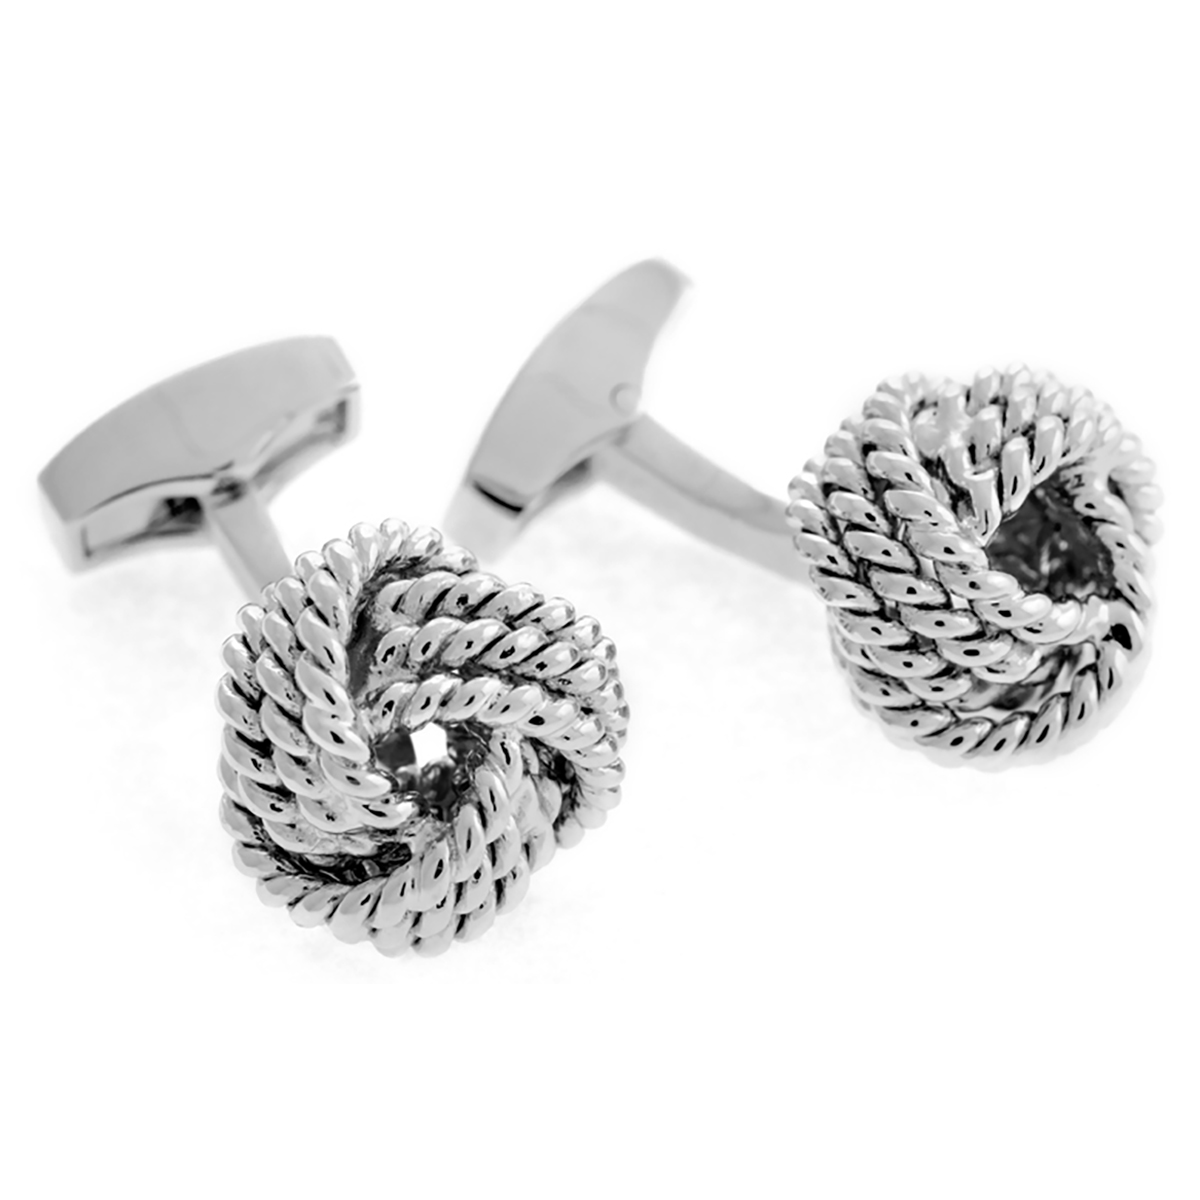 Made in The USA. JJ Weston Wire Love Knot Cufflinks